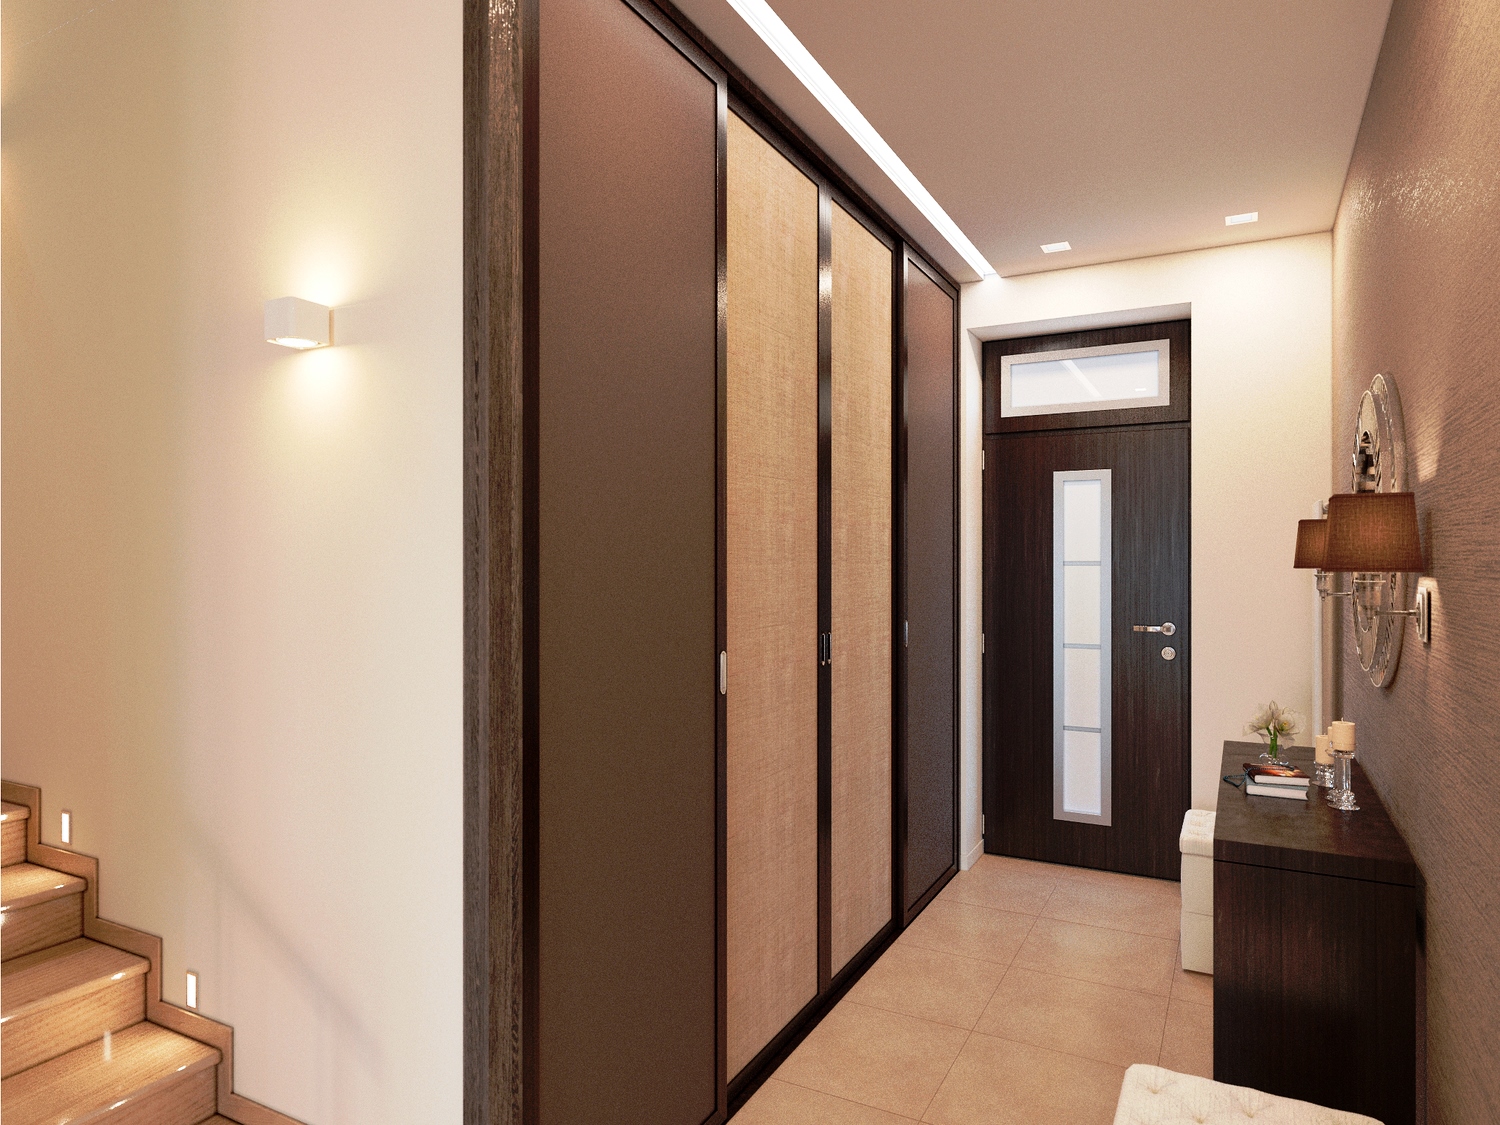 Entrance hall with large built-in wardrobe